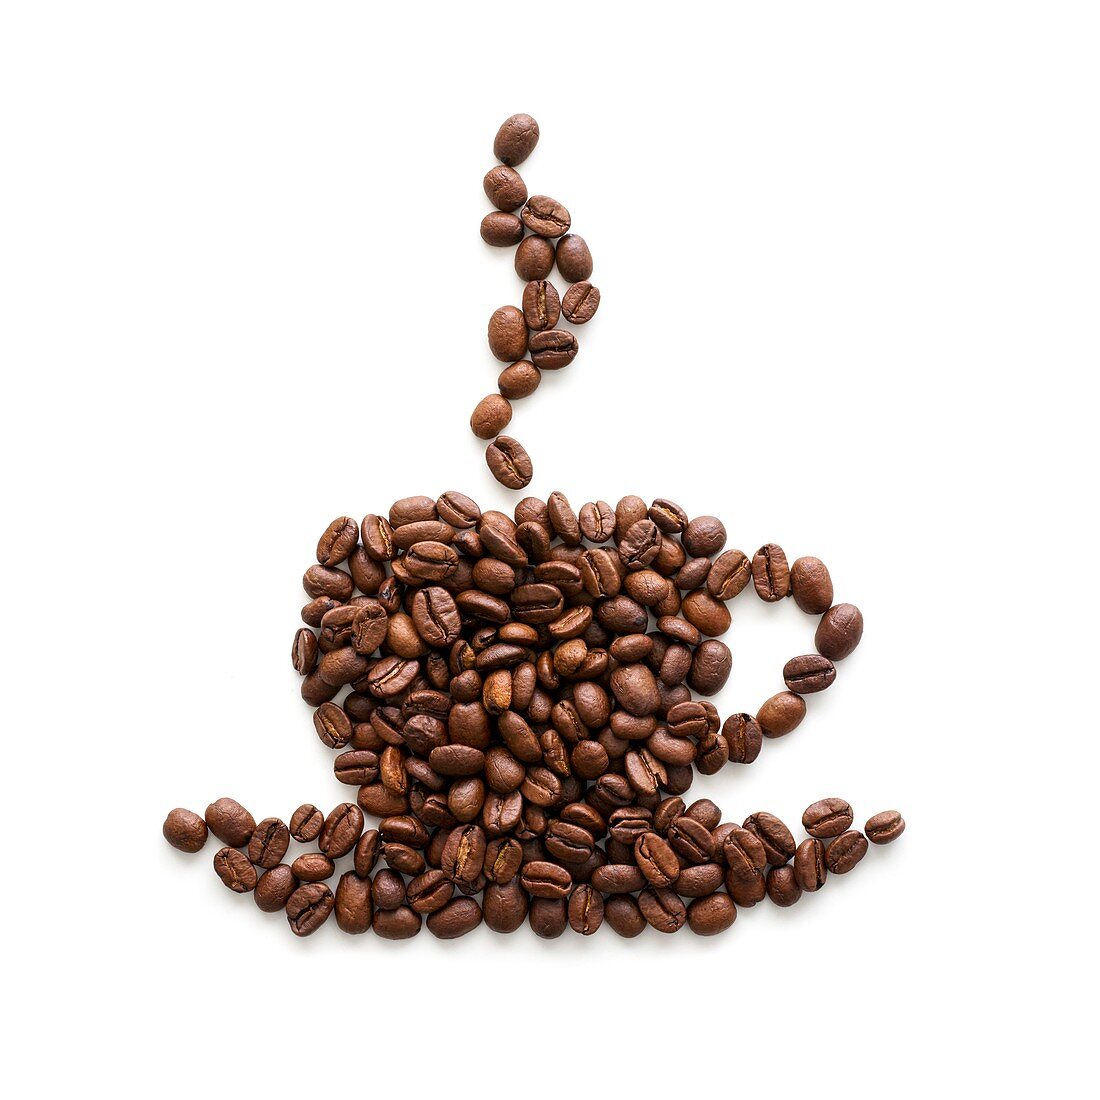 Coffee beans in cup shape